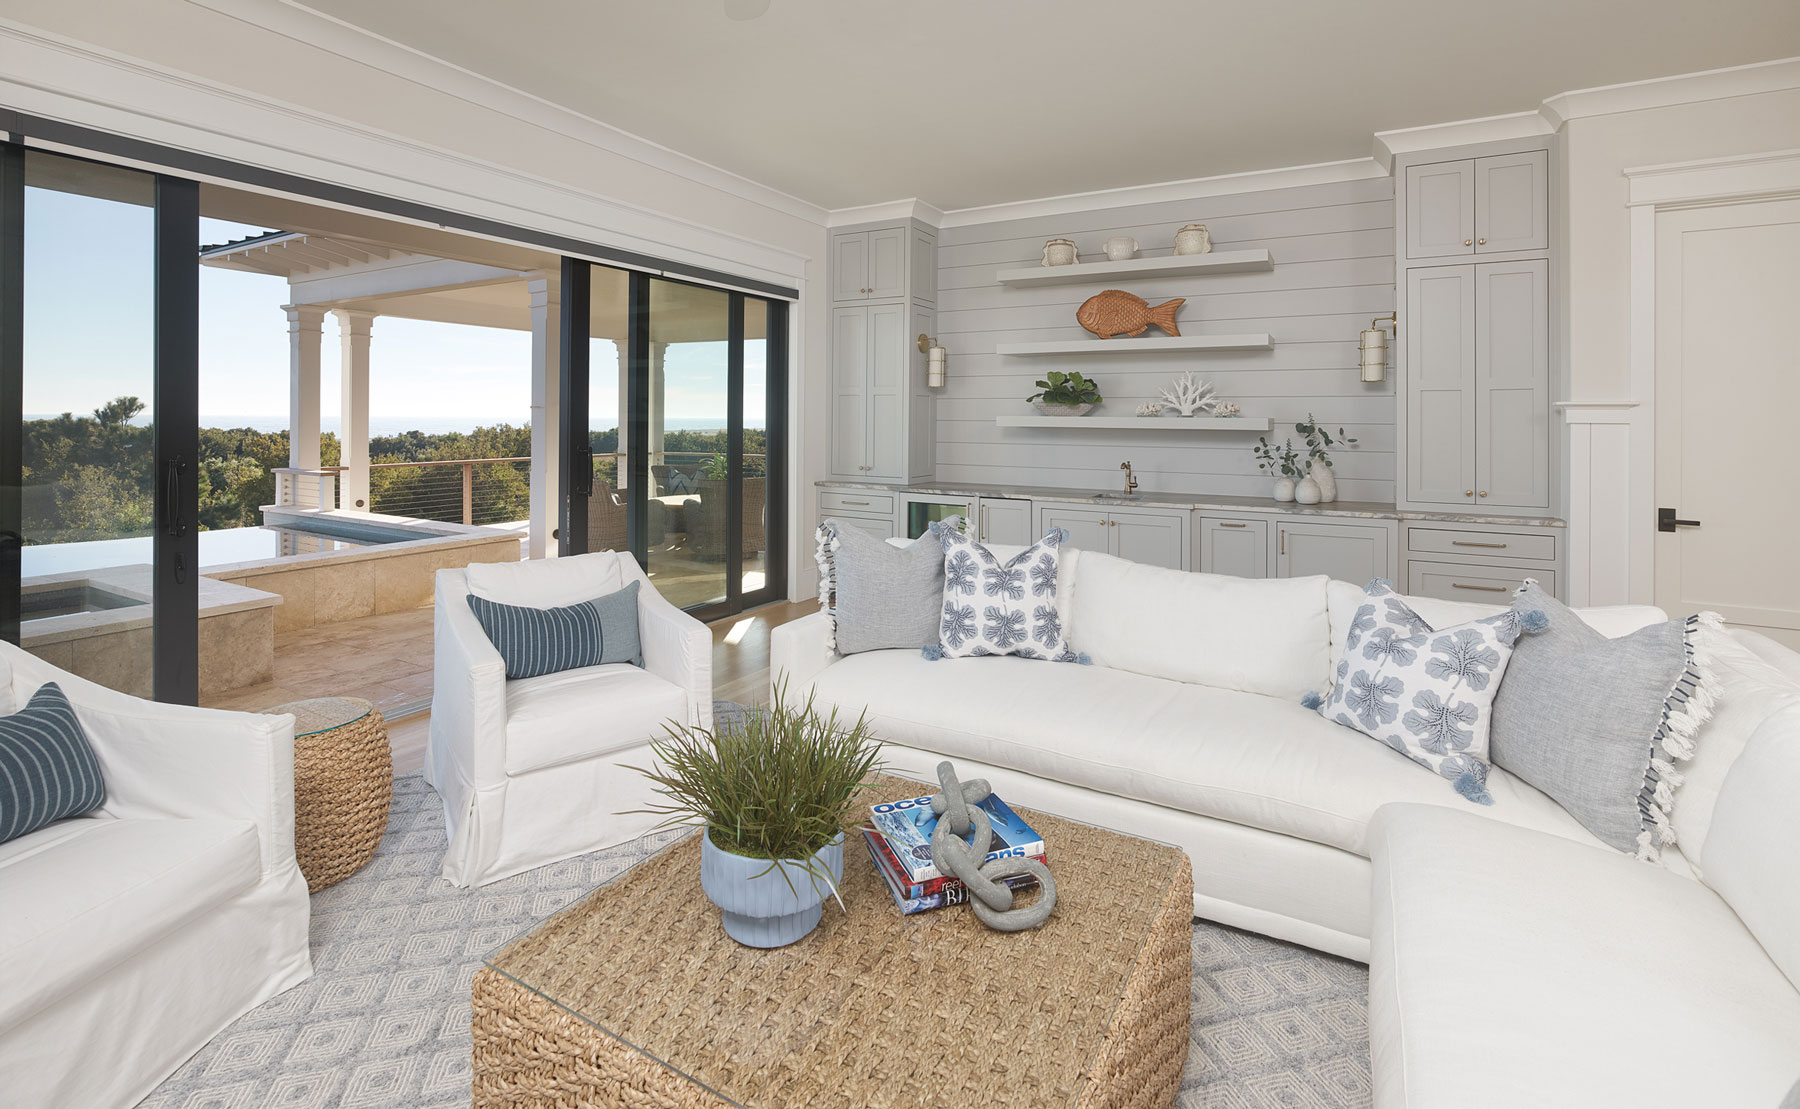 Main floor lounge of reverse plan ocean front home in Isle of Palms designed by Swallowtail Architecture